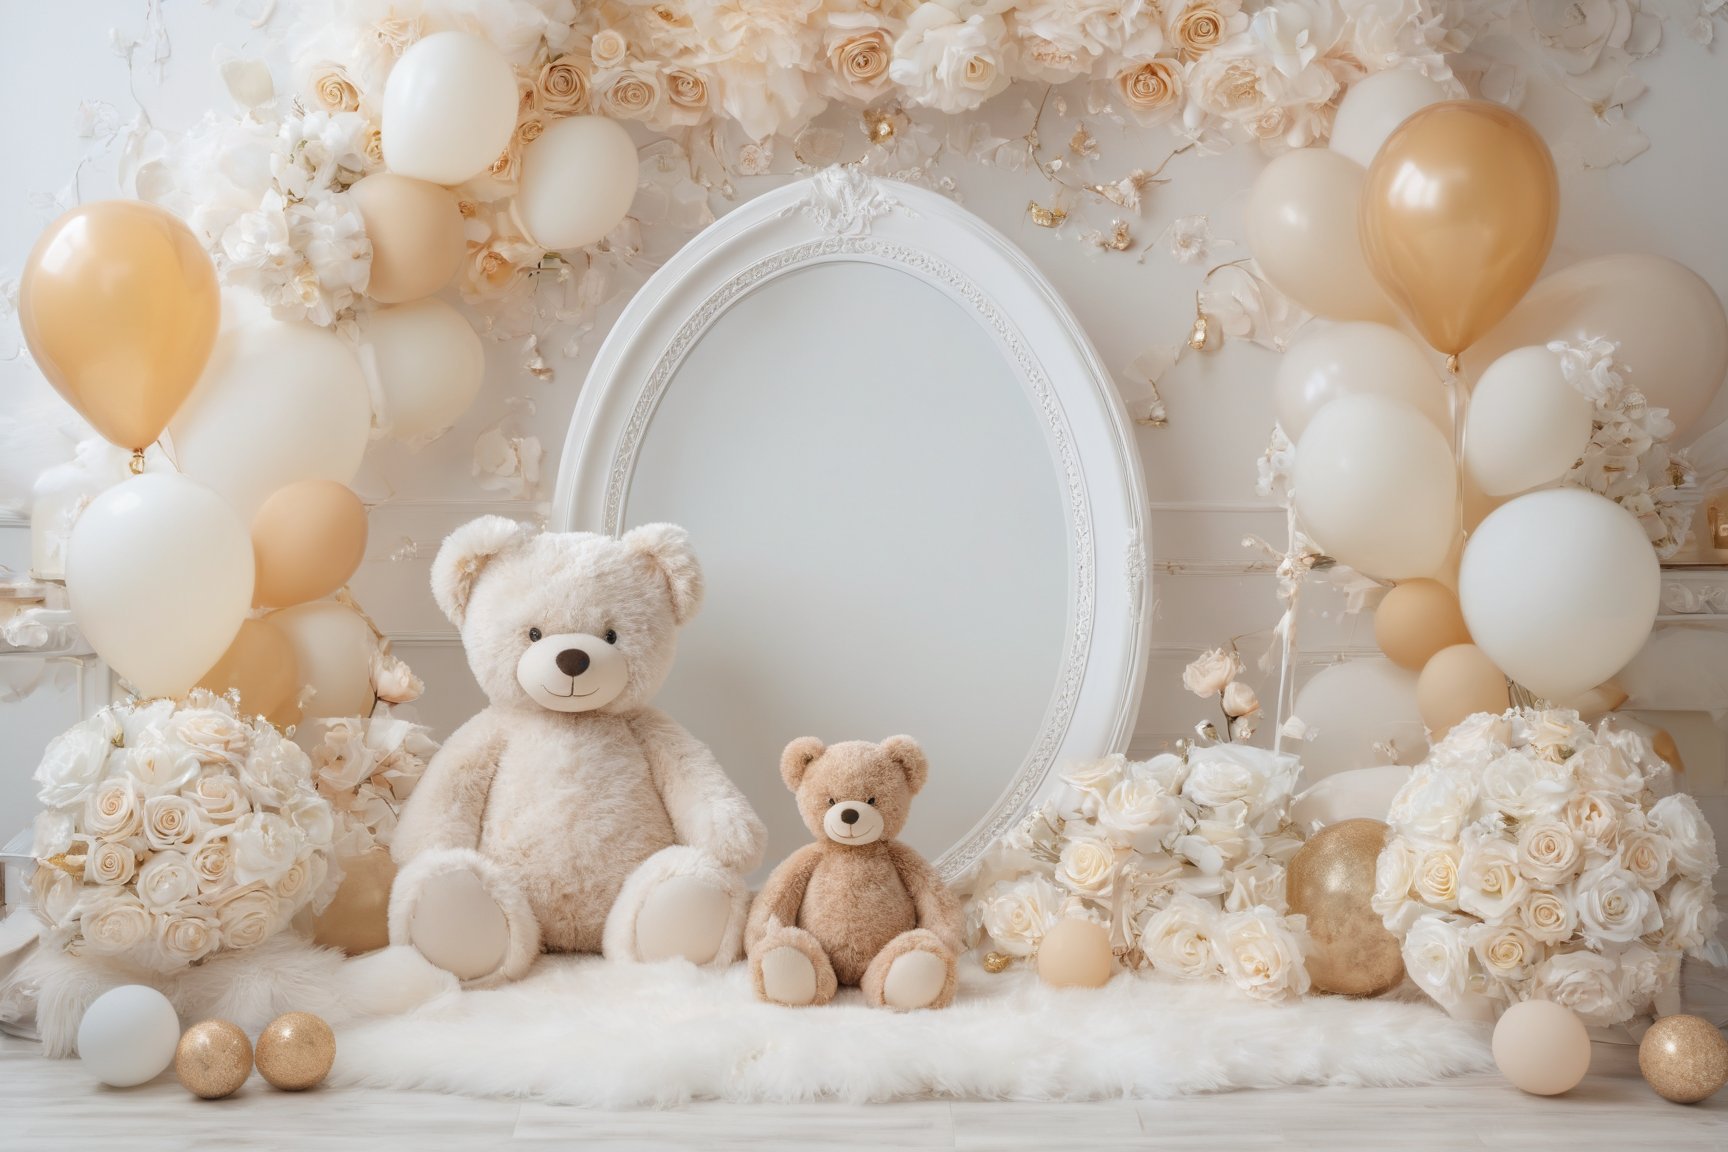 A serene and elegant setting, dominated by soft pastel colors. Two teddy bears, one larger and one smaller, are seated in the foreground, with the larger one positioned in front of an oval mirror frame. Surrounding them are balloons in shades of white, gold, and beige, some of which are adorned with decorative elements like sequins. The floor is carpeted with a fluffy white material, and scattered around are white roses and daisies. The backdrop features white walls with an ornate design, adding to the luxurious ambiance of the scene.